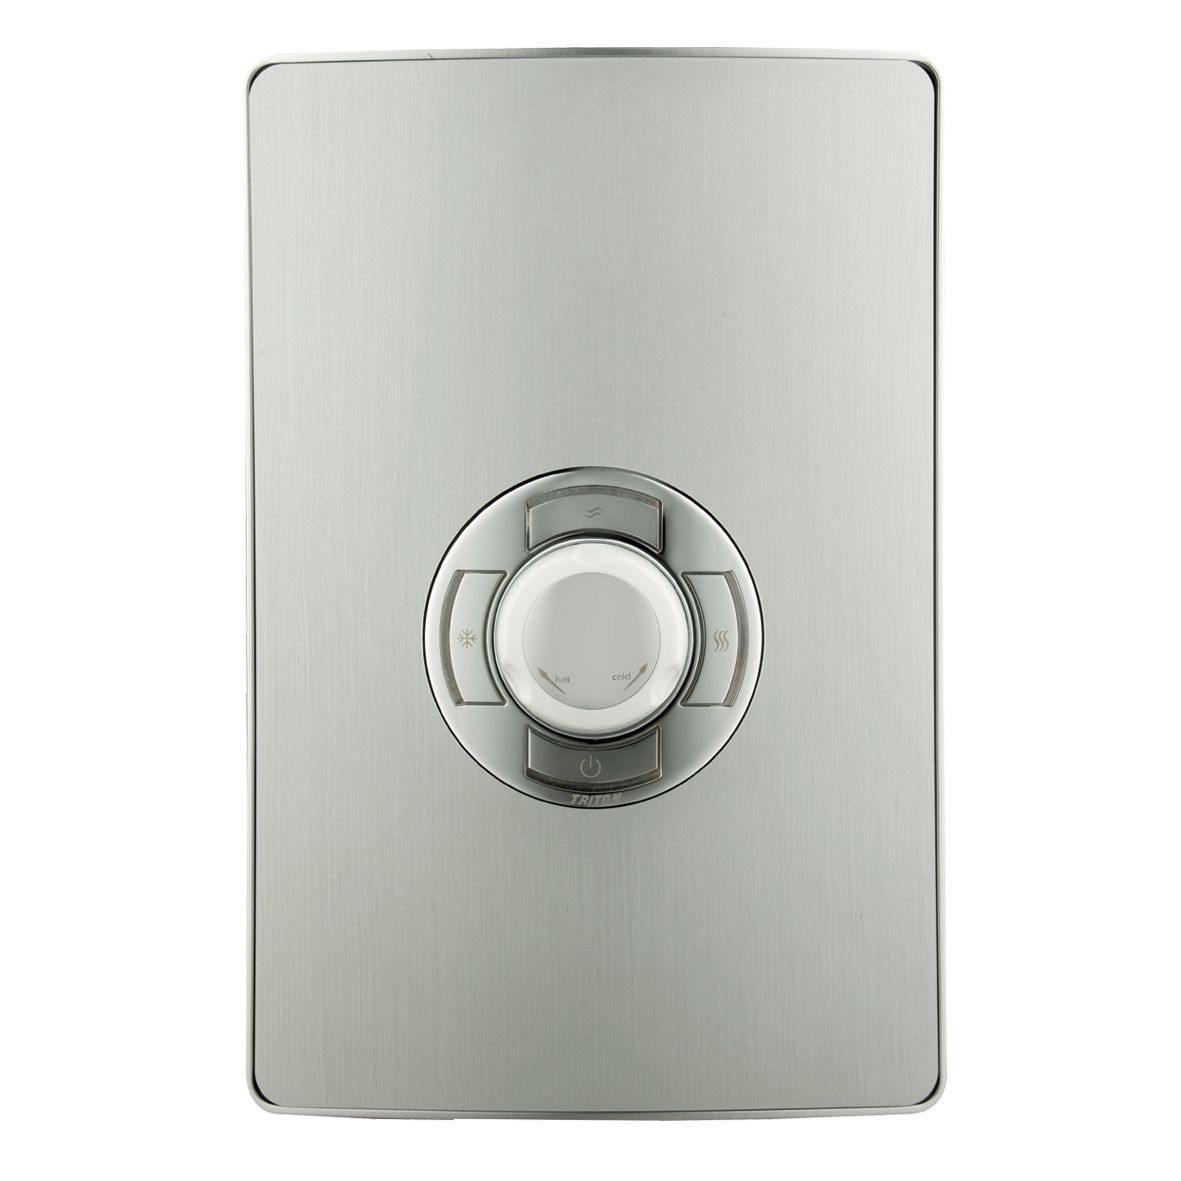 Triton Brushed steel effect Manual Electric Shower, 8.5kW